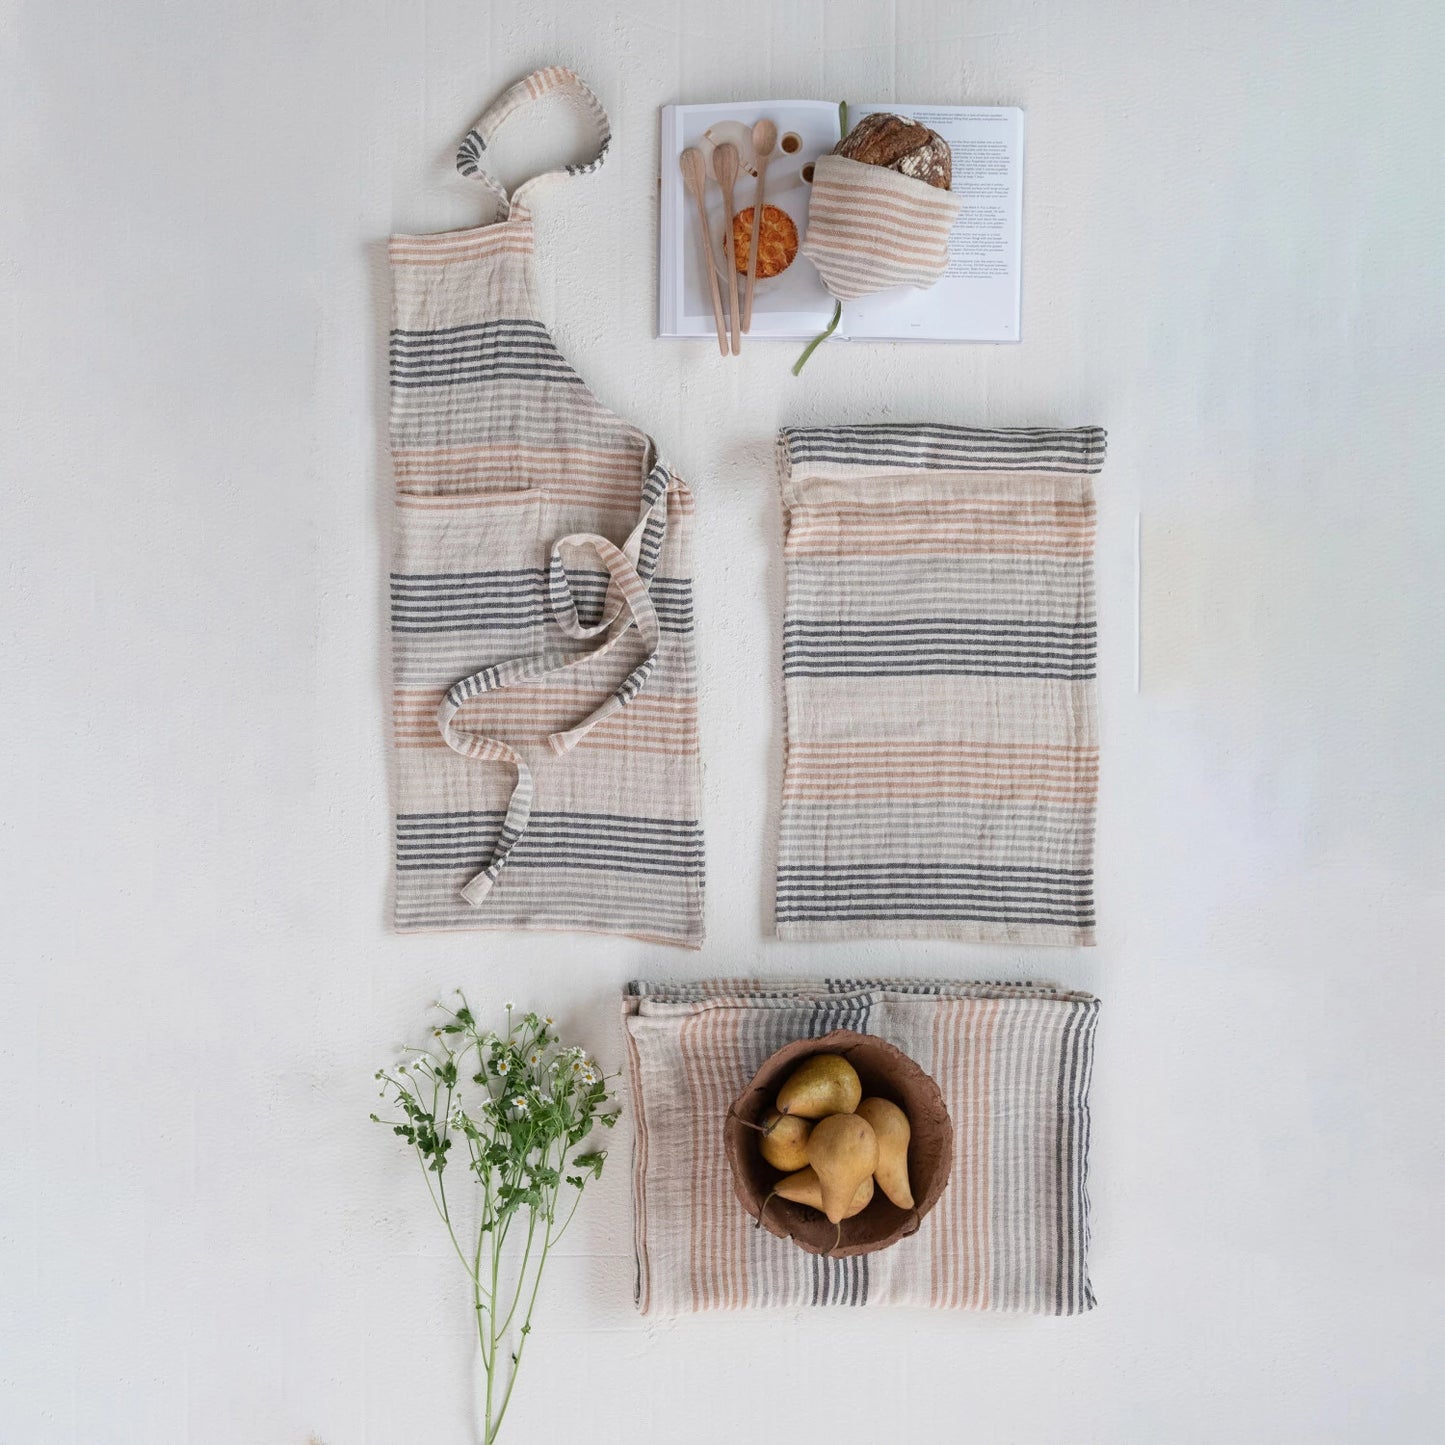 Woven Cotton Double Cloth Yarn Dyed Tea Towel with Fringe